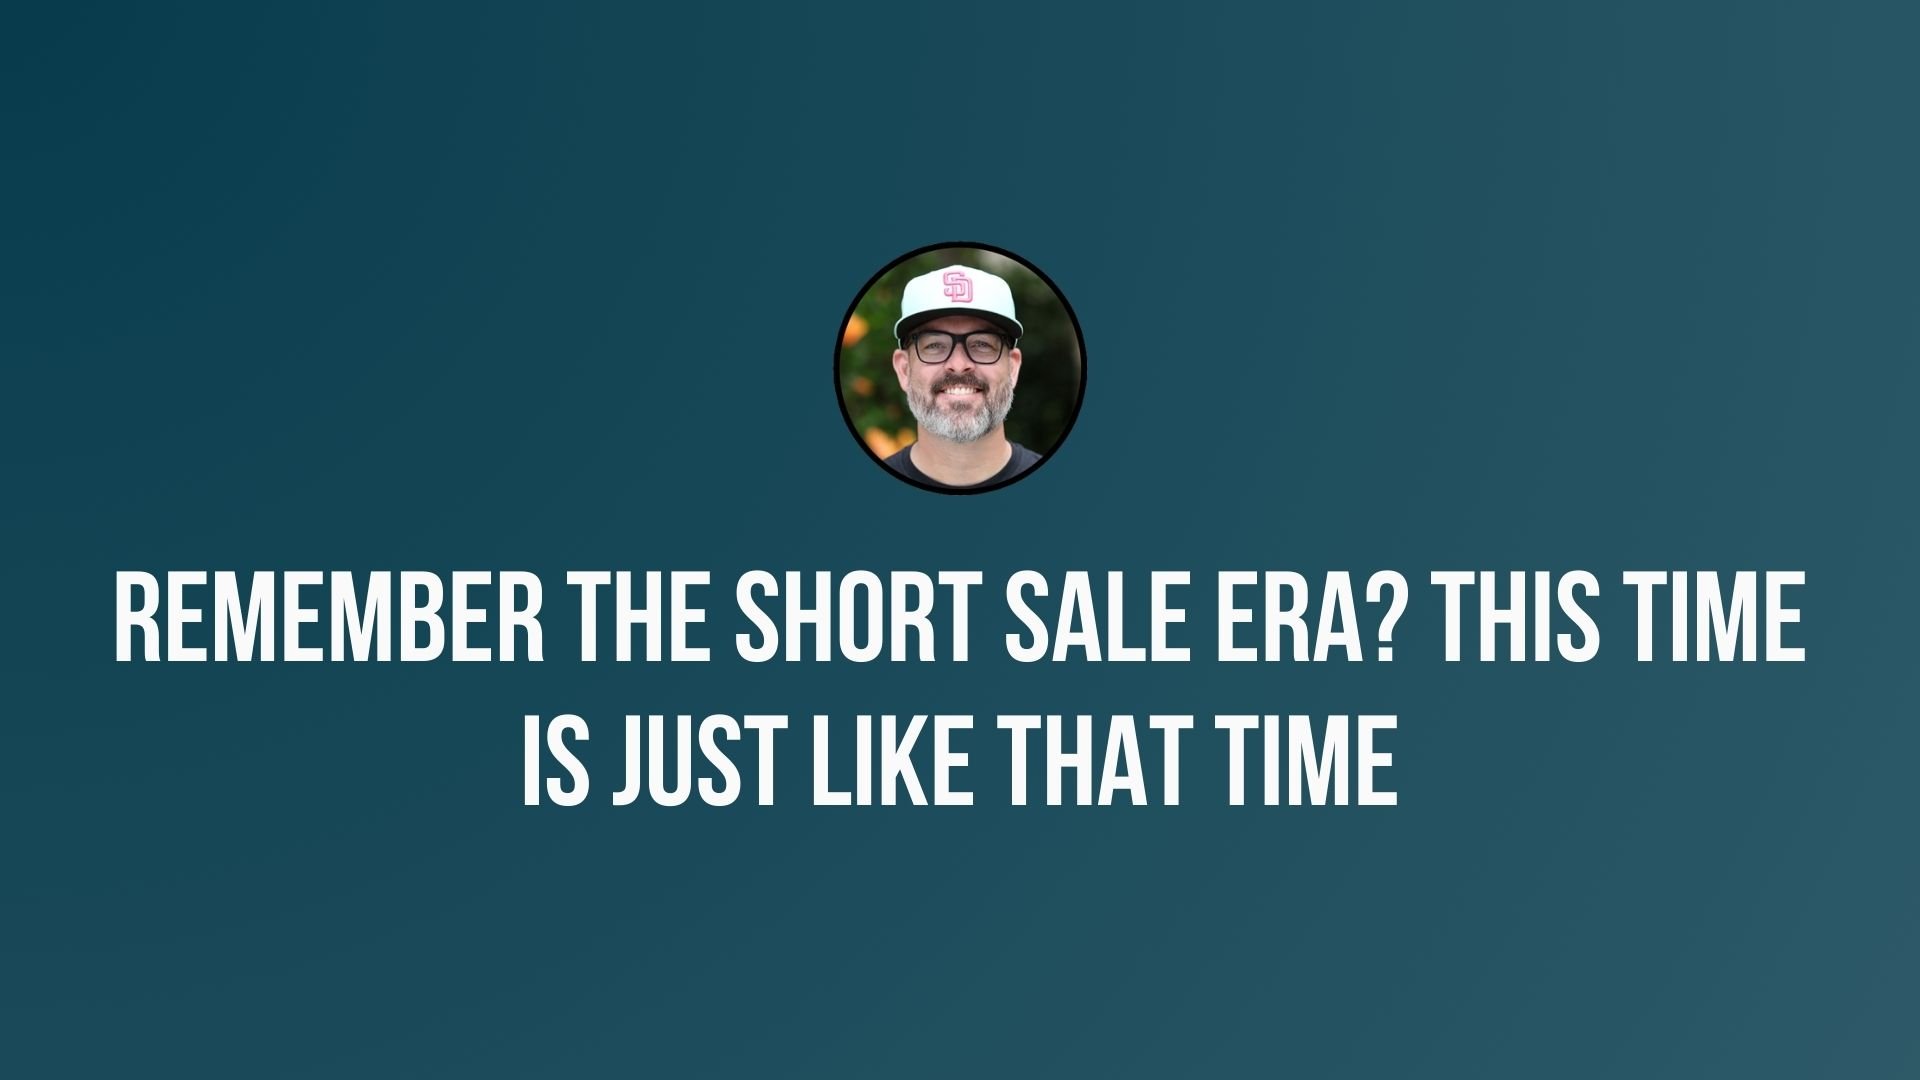 Remember the Short Sale Era? Well this time is just like that time